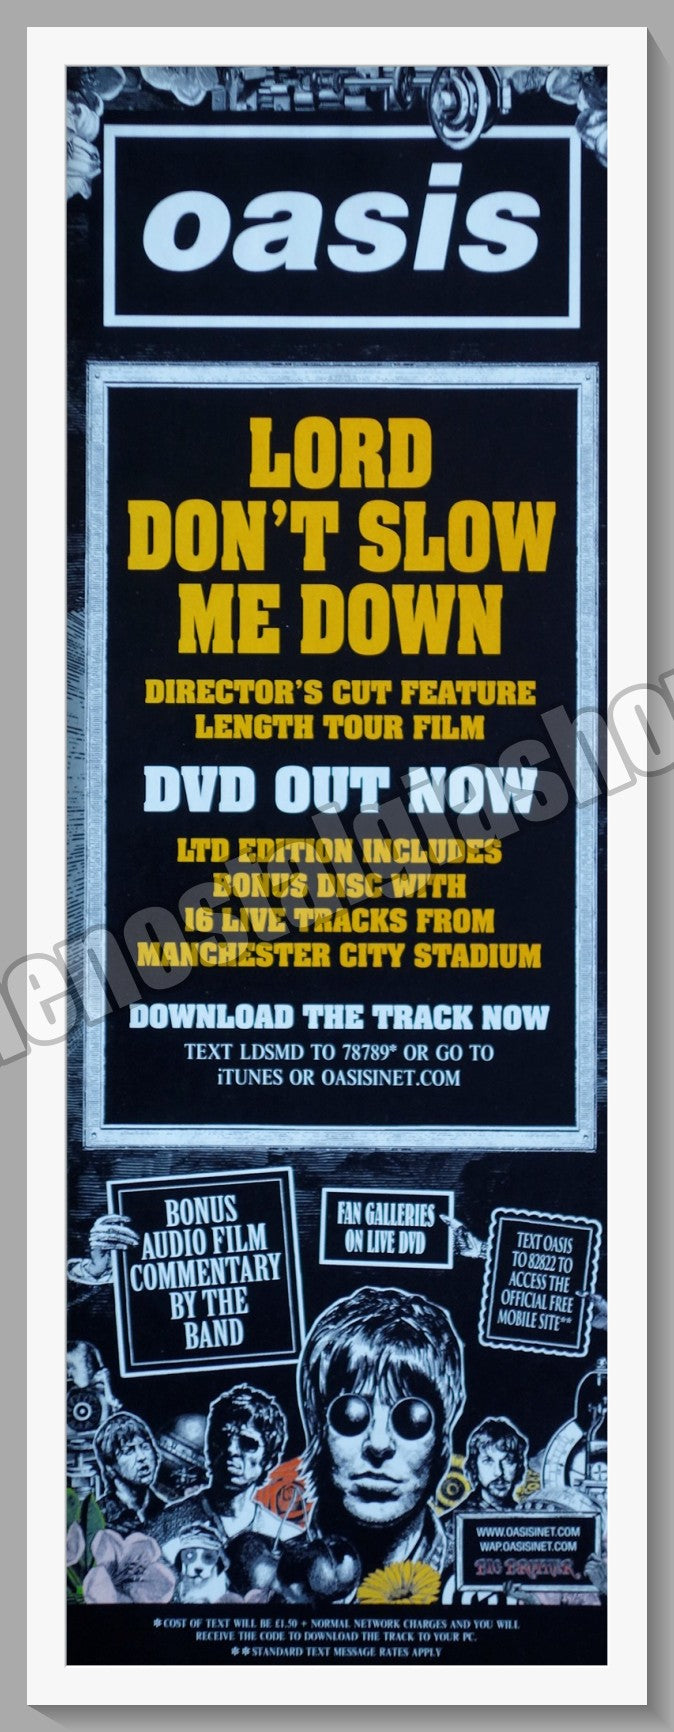 Lord　Nostalgia　AD400099)　The　Don't　2008　Original　–　(ref　Advert　Slow　Down.　Me　Oasis.　Shop